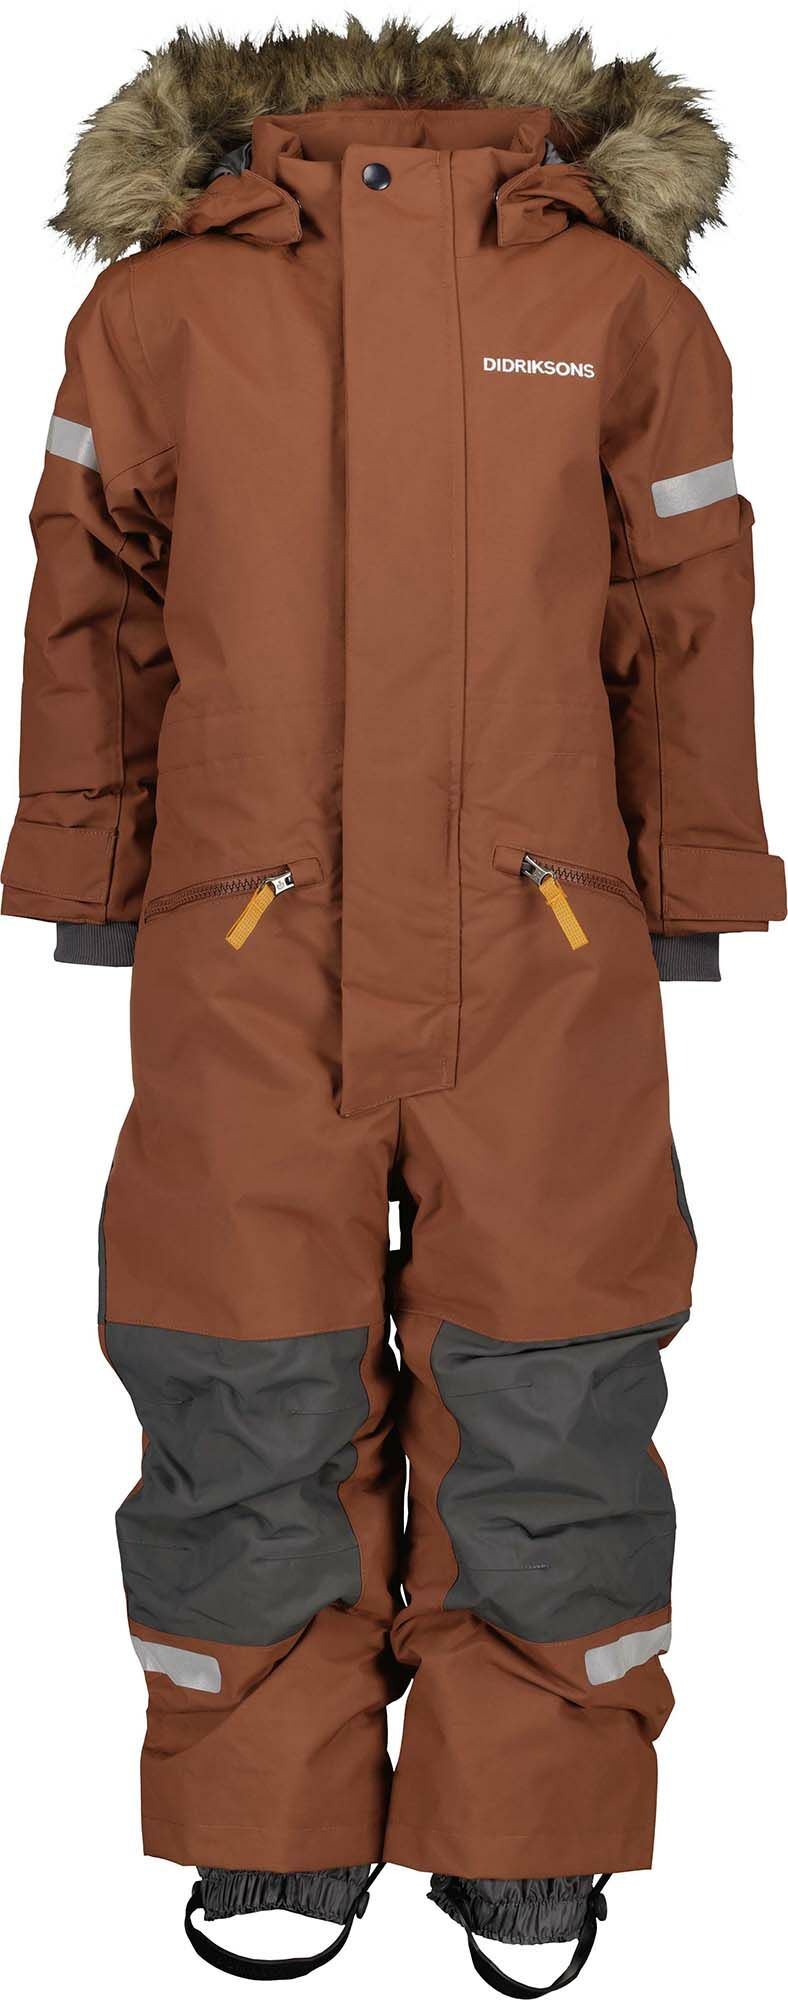 Didriksons Migisi Overall Earth Brown 80